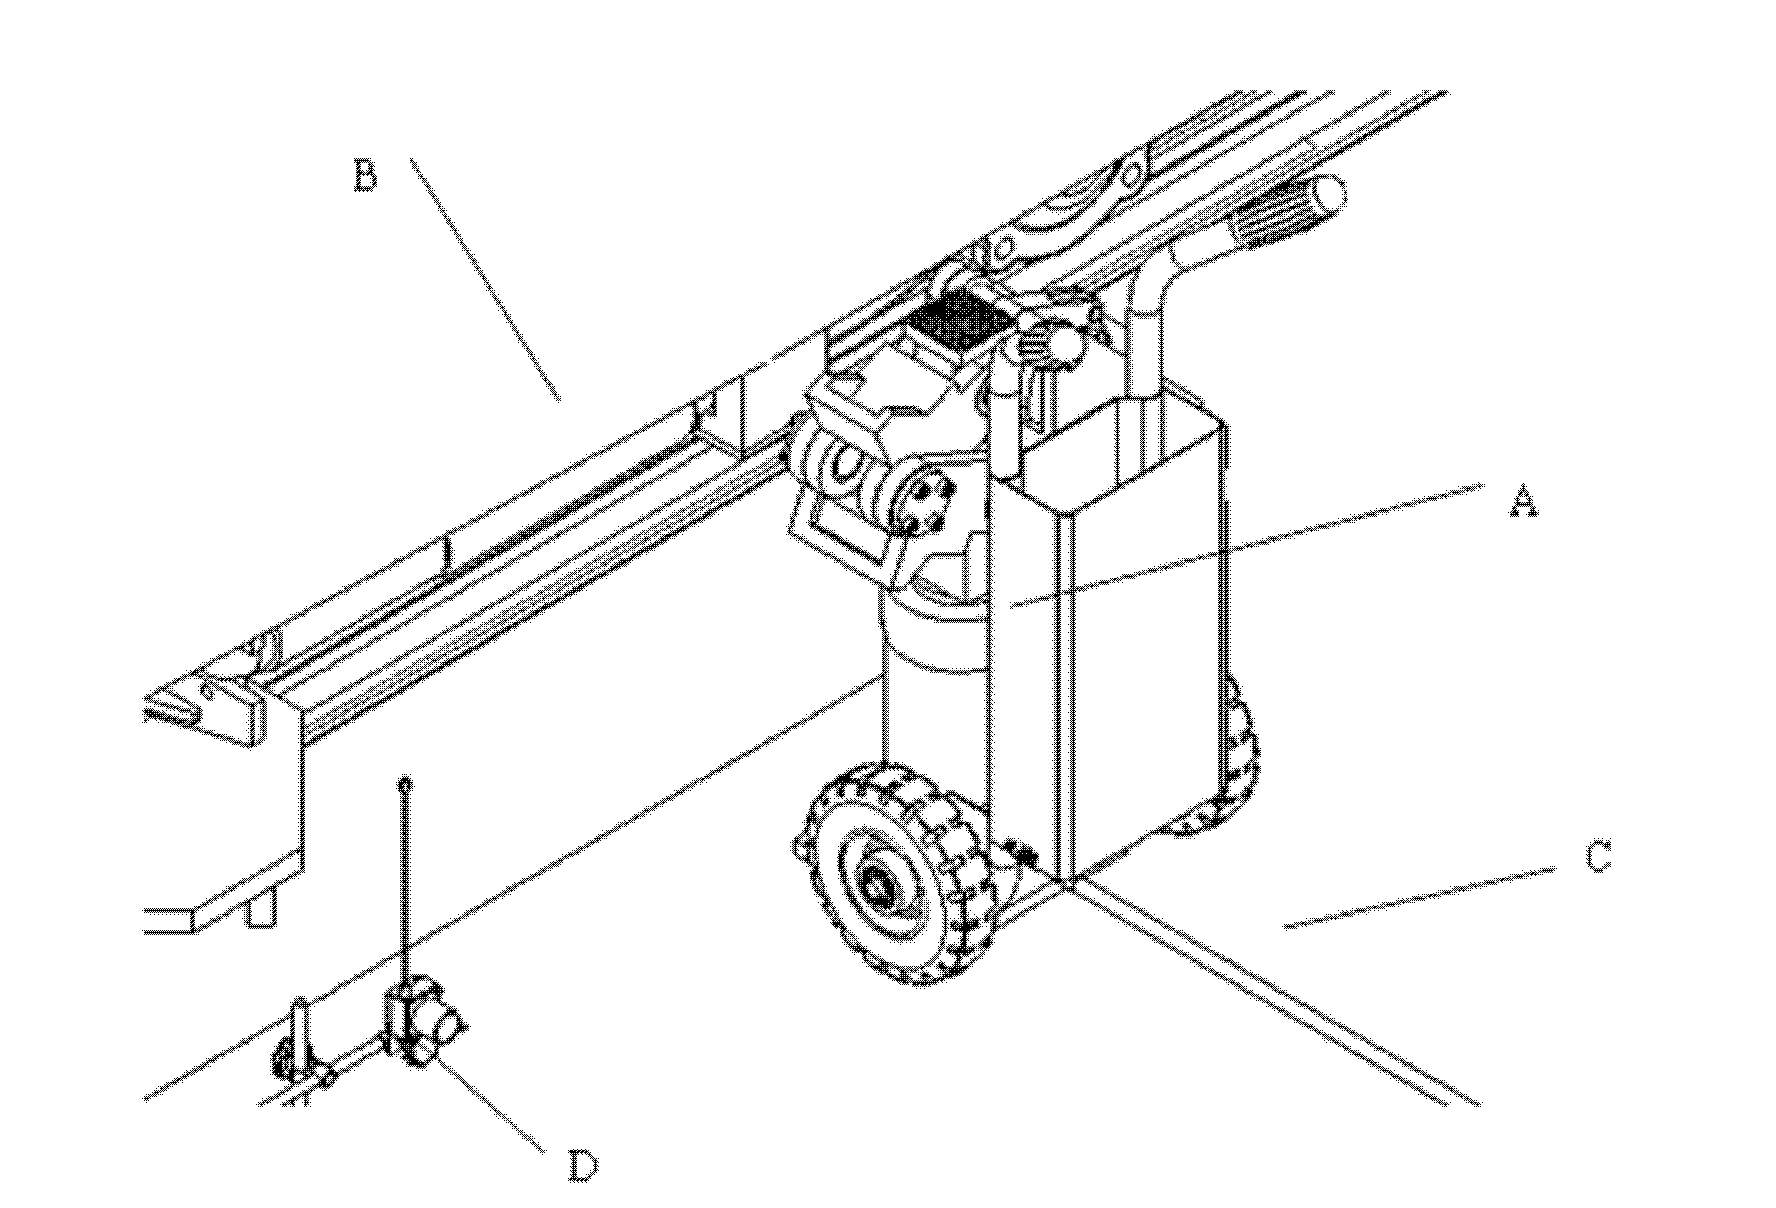 System for testing vibration attenuation of suspension of rail vehicle